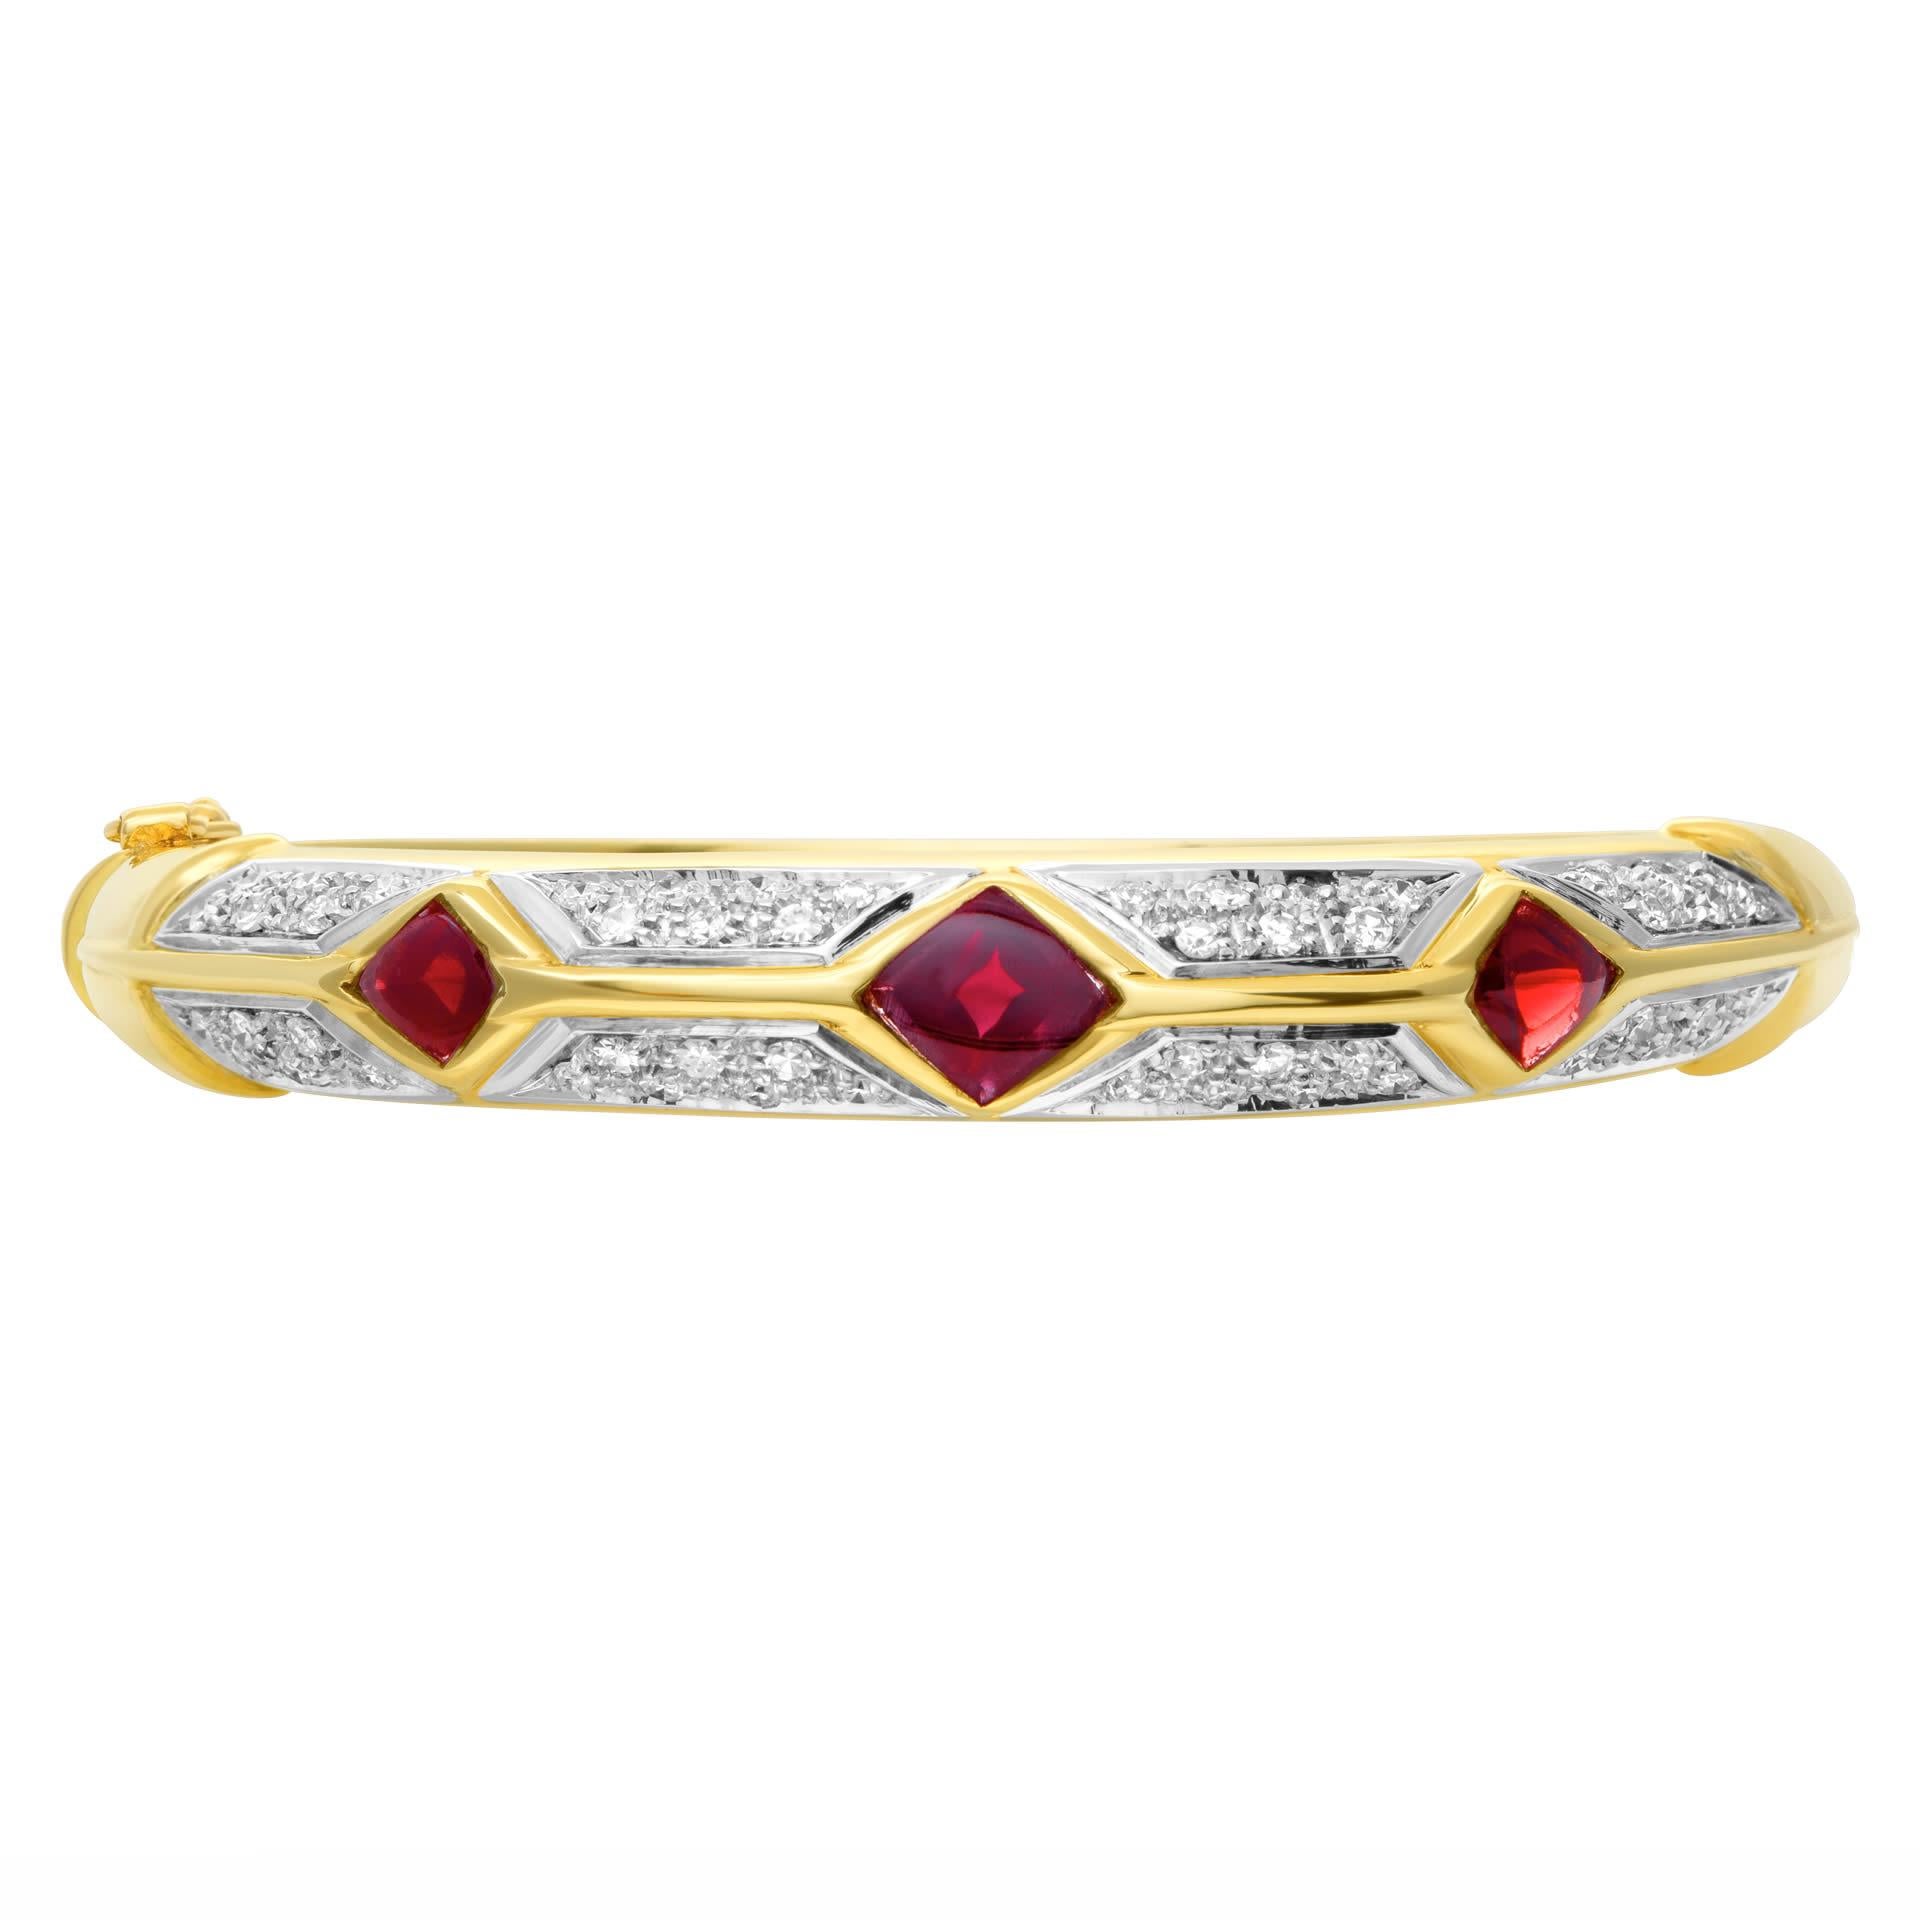 Garnet and diamond bangle in 18k white and yellow gold with 1 carat in round brilliant cut G-H color, VS clarity diamonds. Bangle is approximately 9.6mm wide. Fits 6.5-7in wrist.
